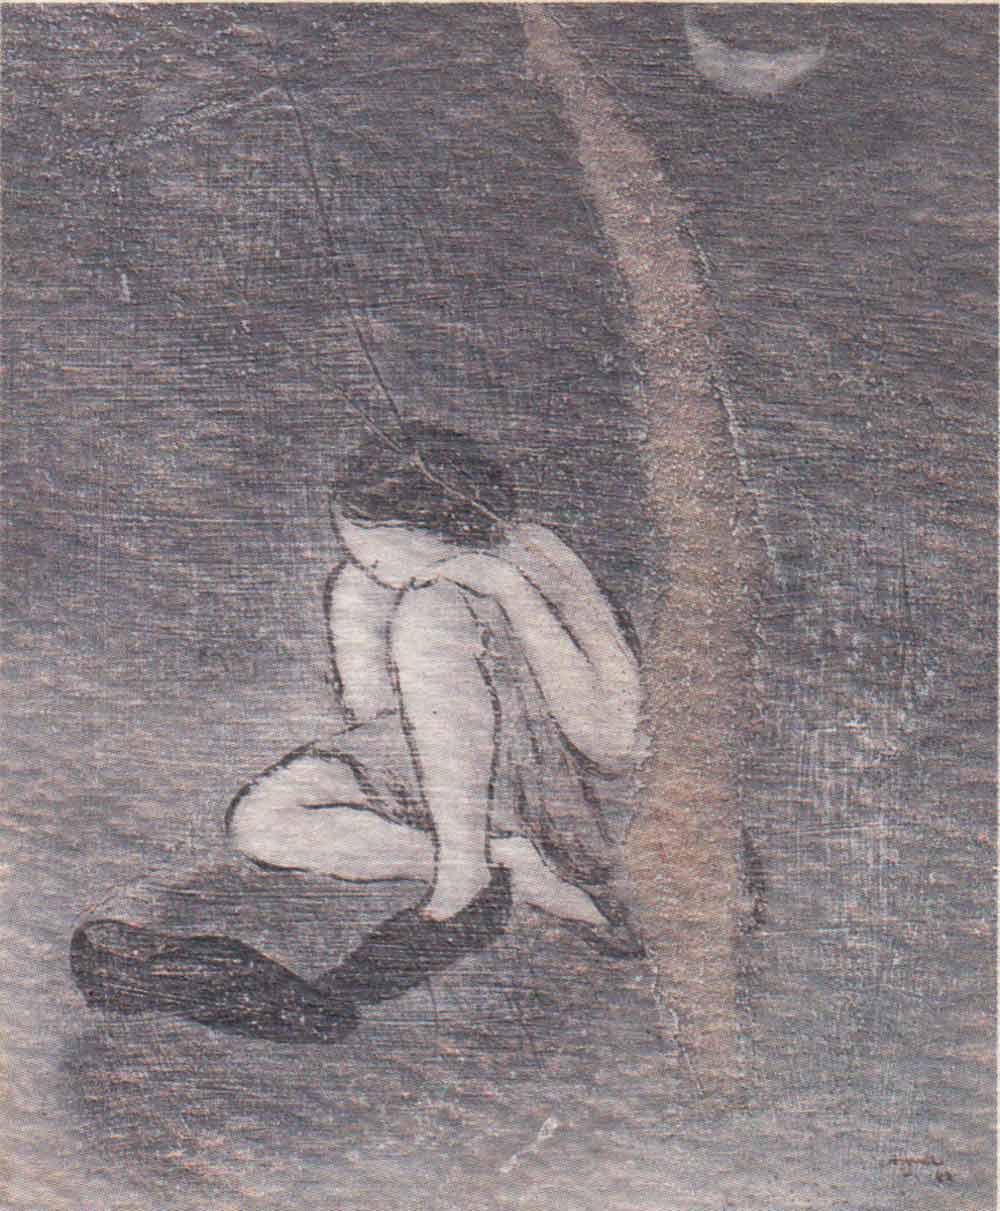 <em>In His Shoes</em>, 1999, Oil on mixed media, 19 x 15 in. (48 x 38 cm)